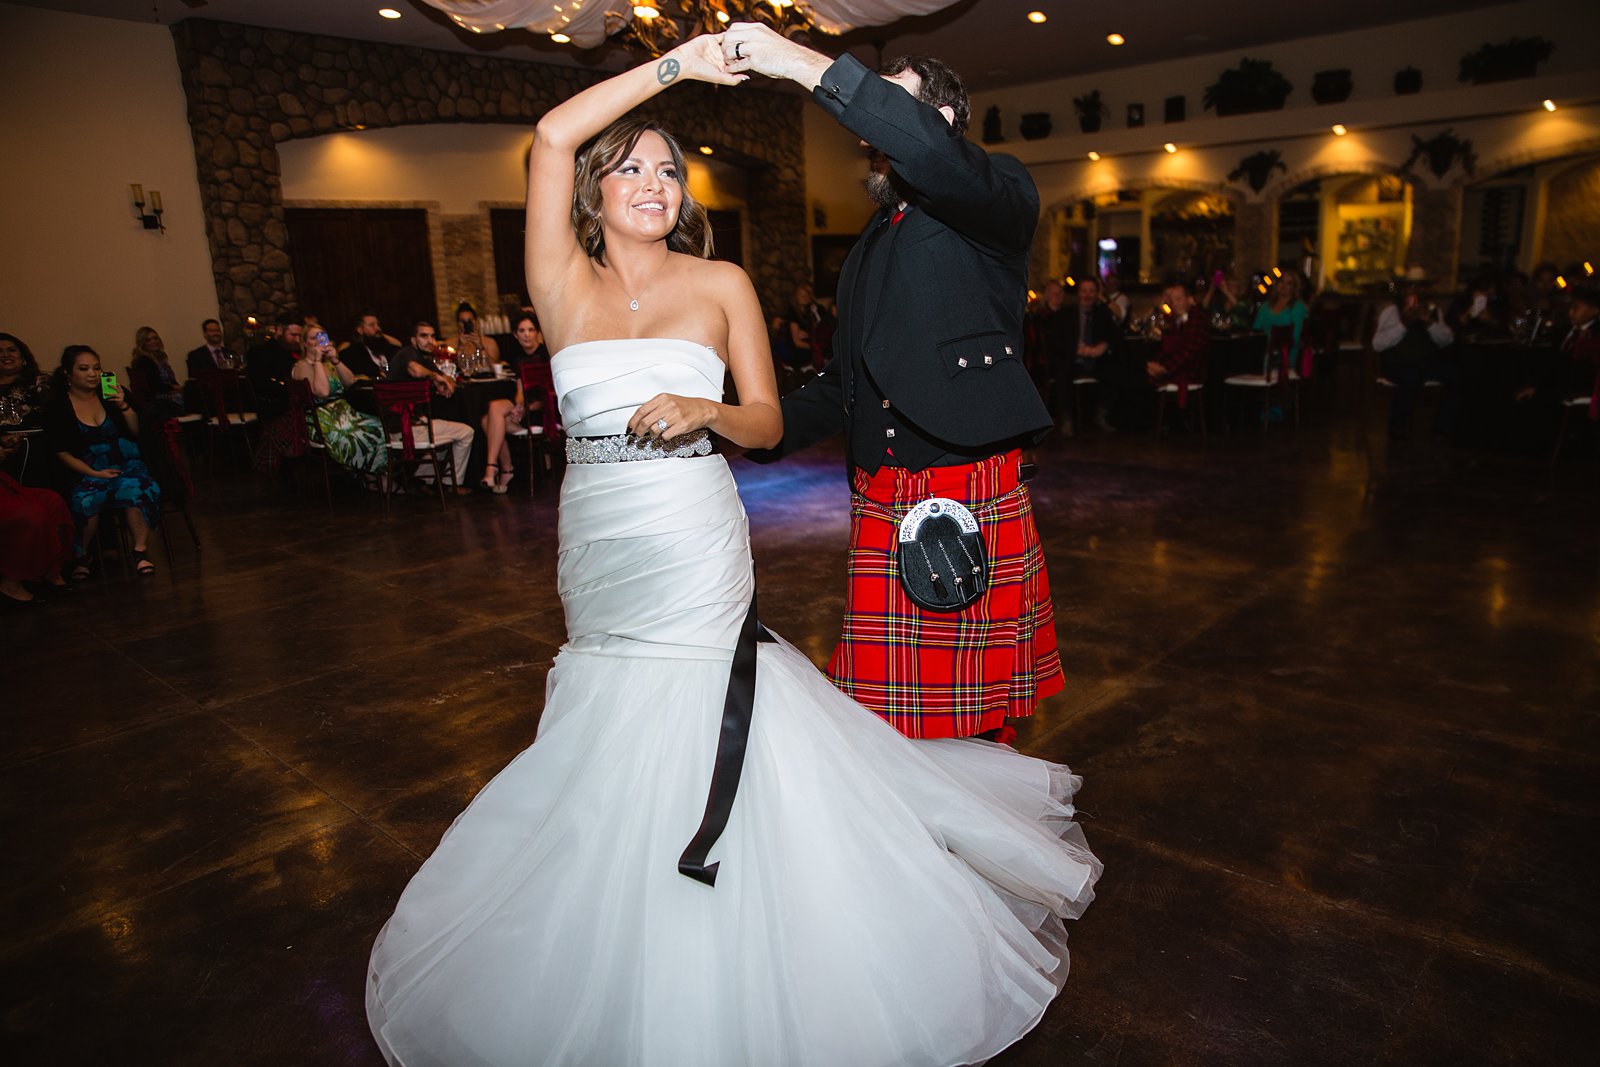 Bride and groom share their first dance at the Superstition Manor by Arizona wedding photographers PMA Photography.